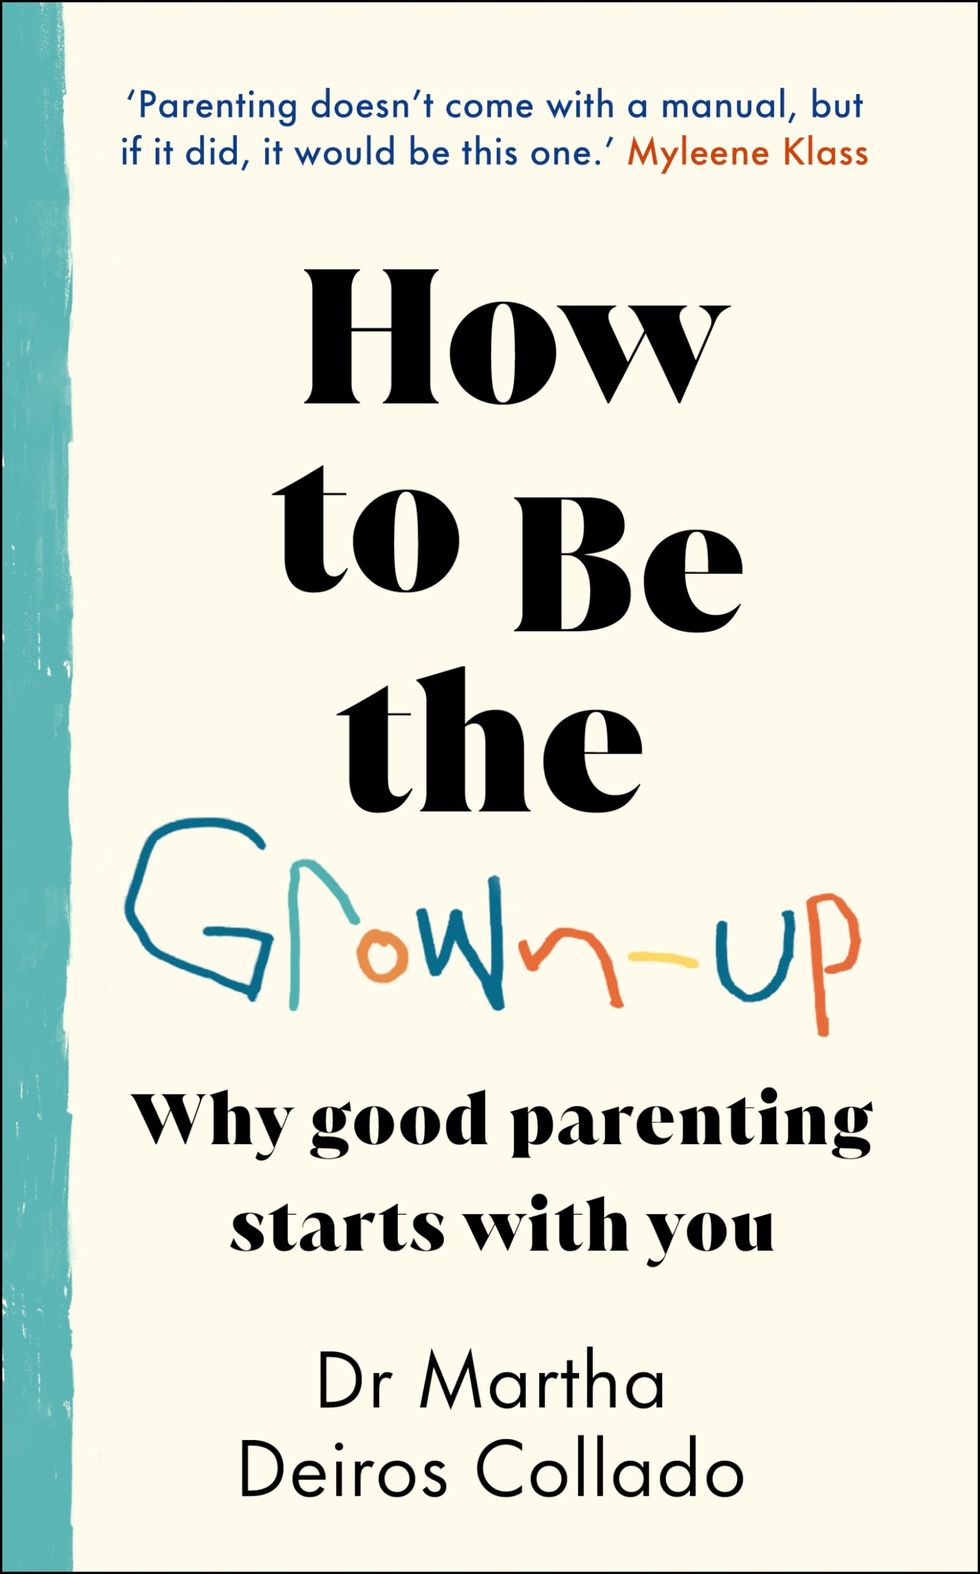 How to Be The Grown-Up by Dr Martha Deiros Collado